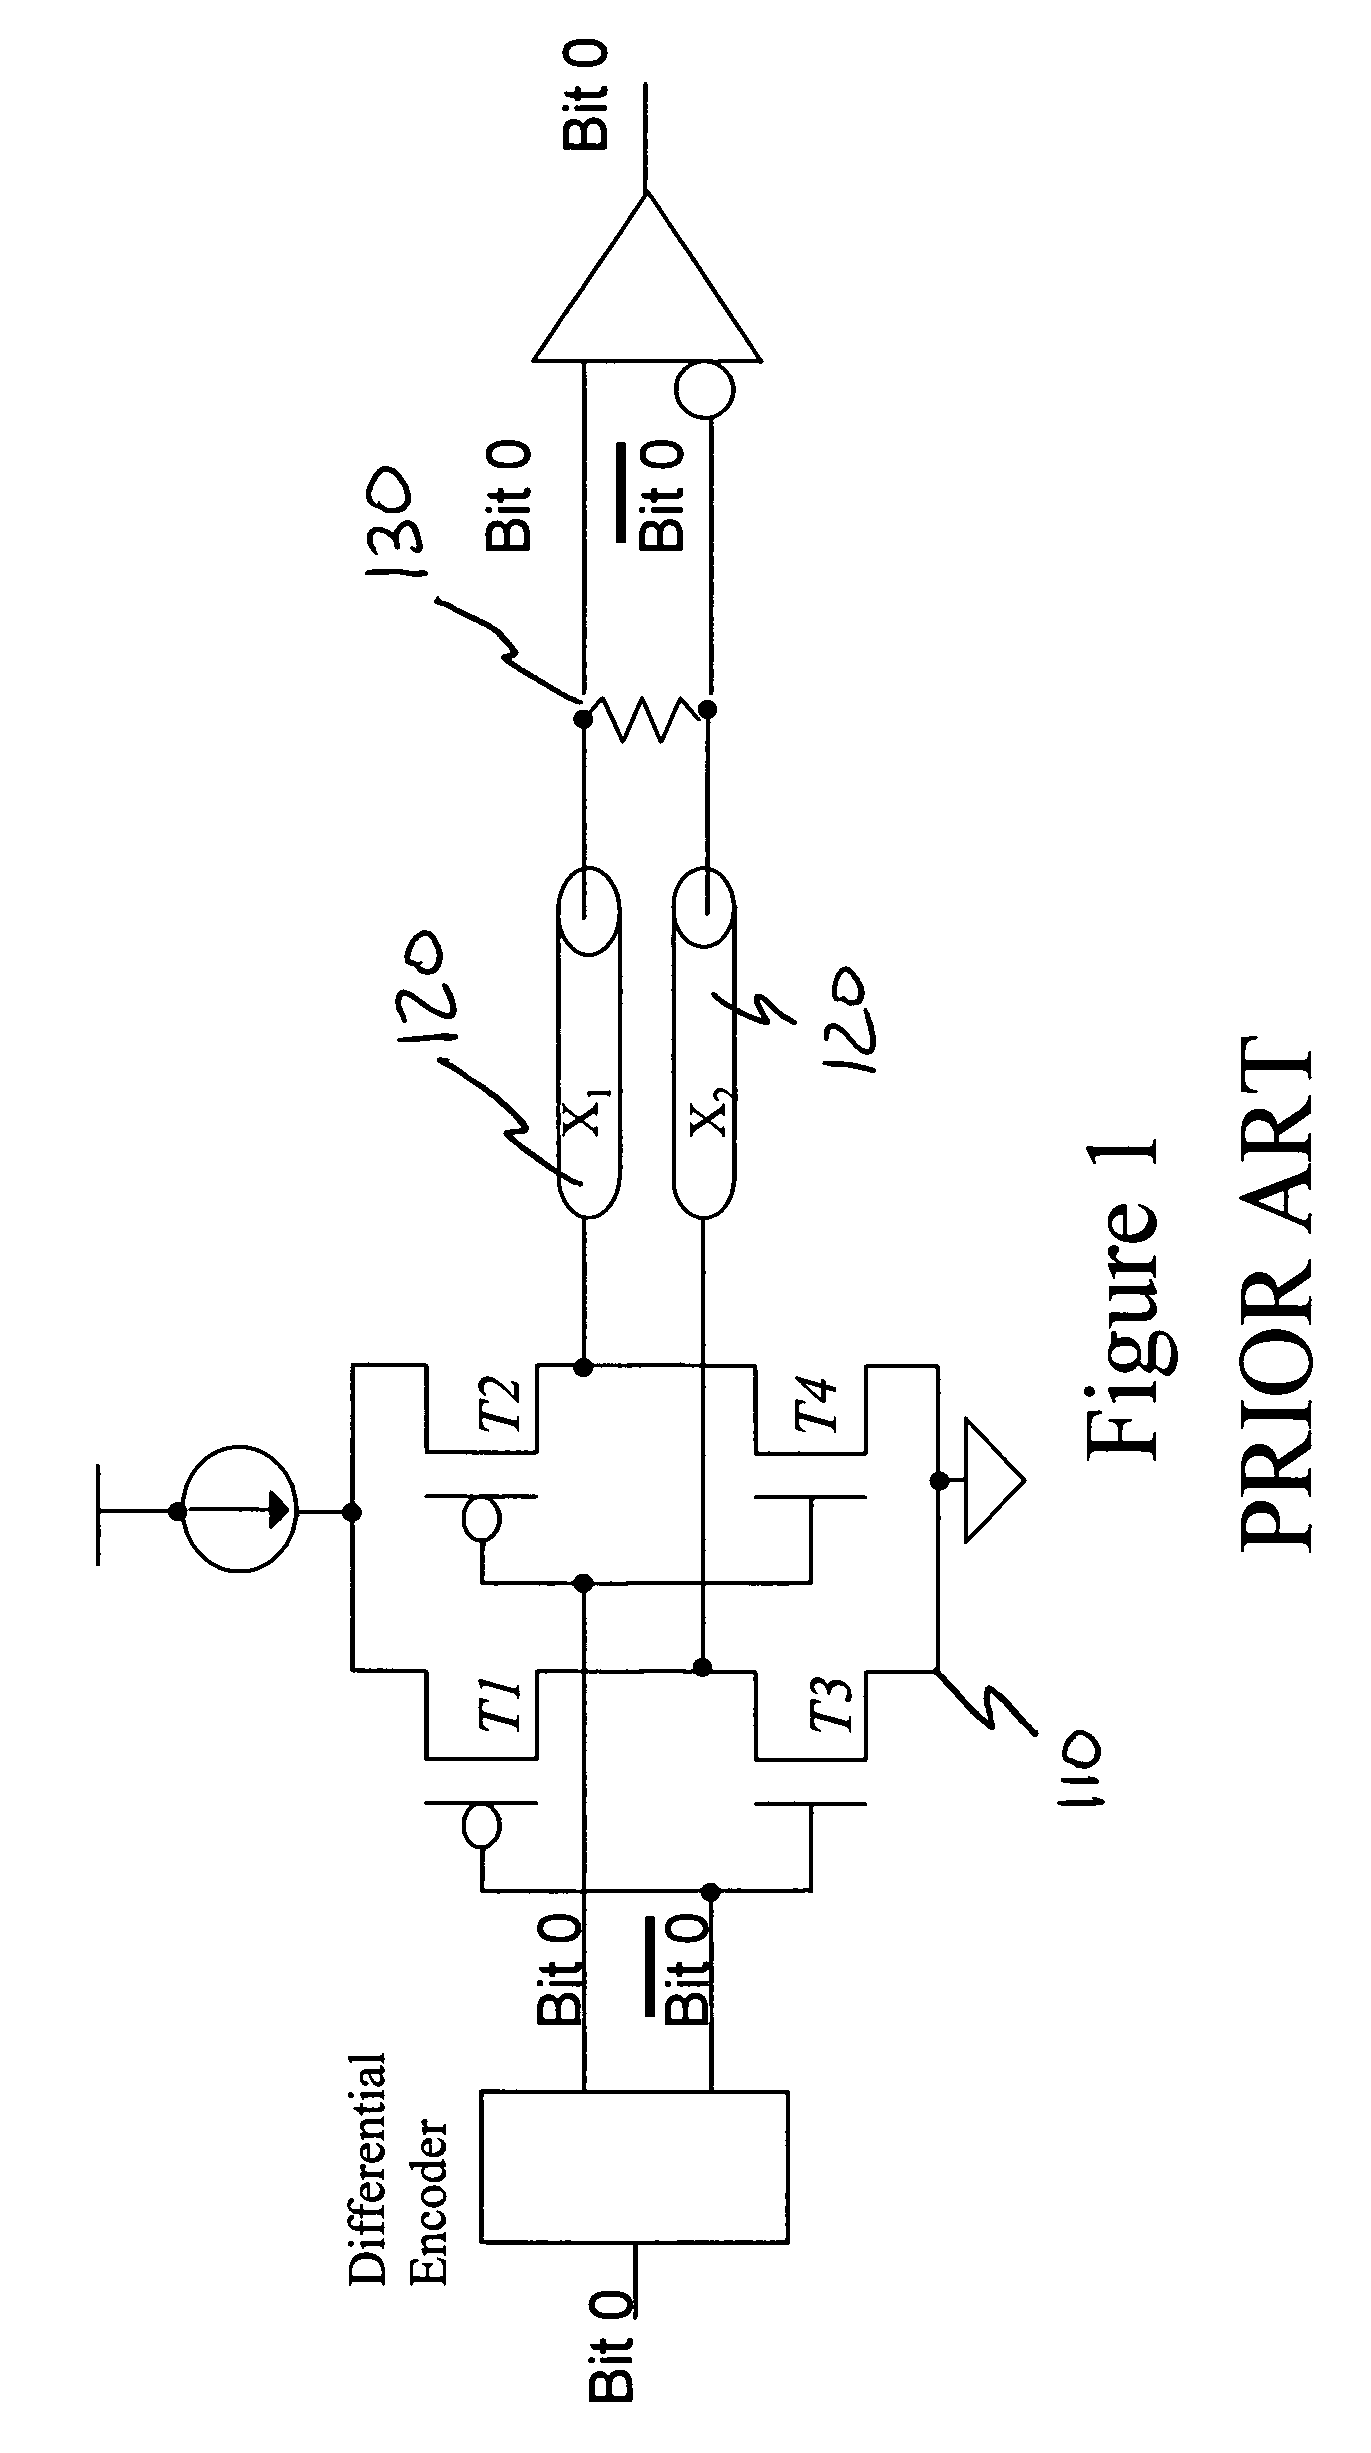 Power efficient, high bandwidth communication using multi-signal-differential channels